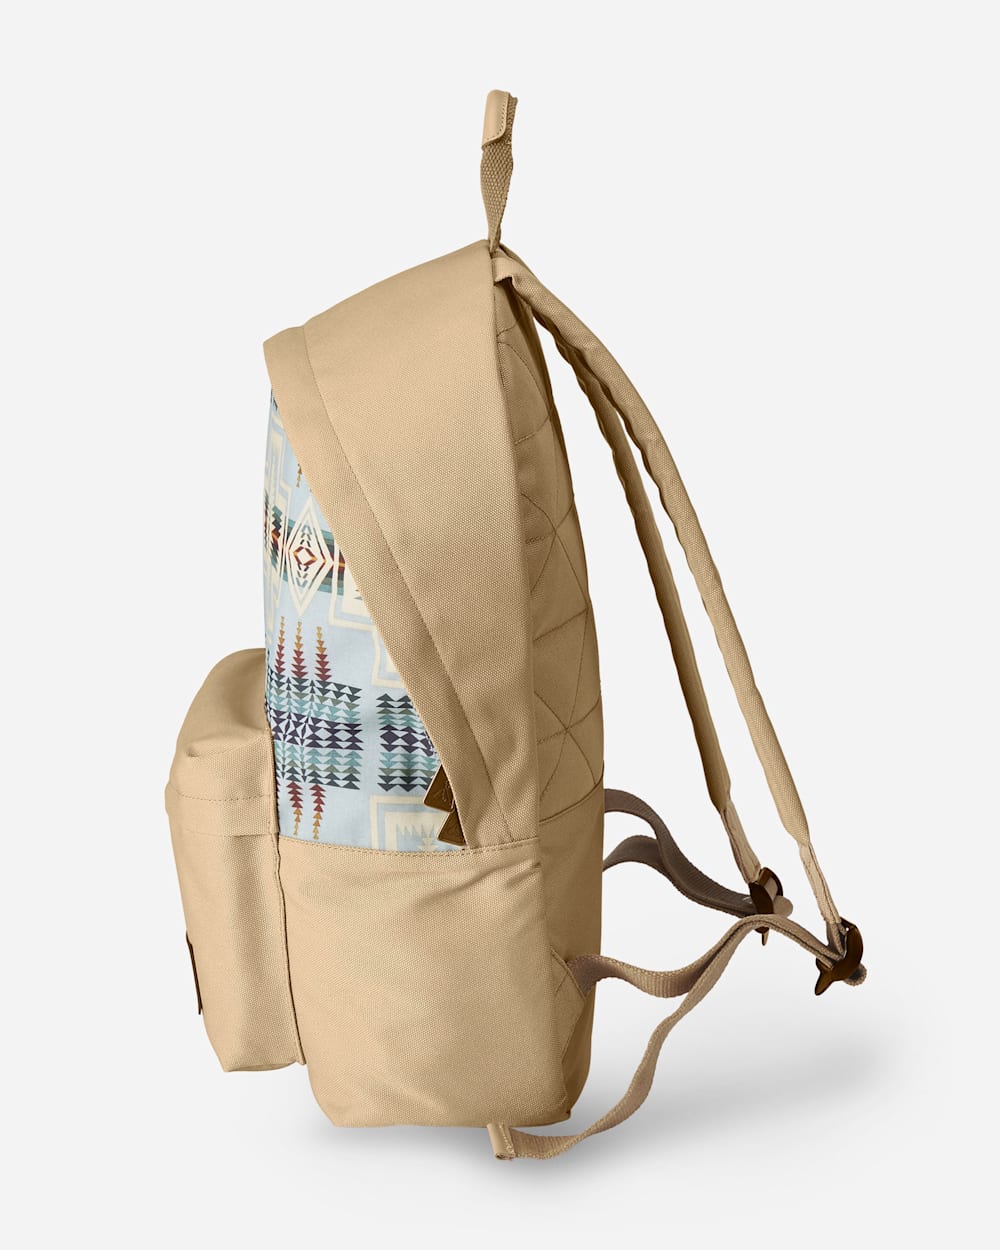 ALTERNATE VIEW OF HARDING CANOPY CANVAS BACKPACK IN AQUA image number 2